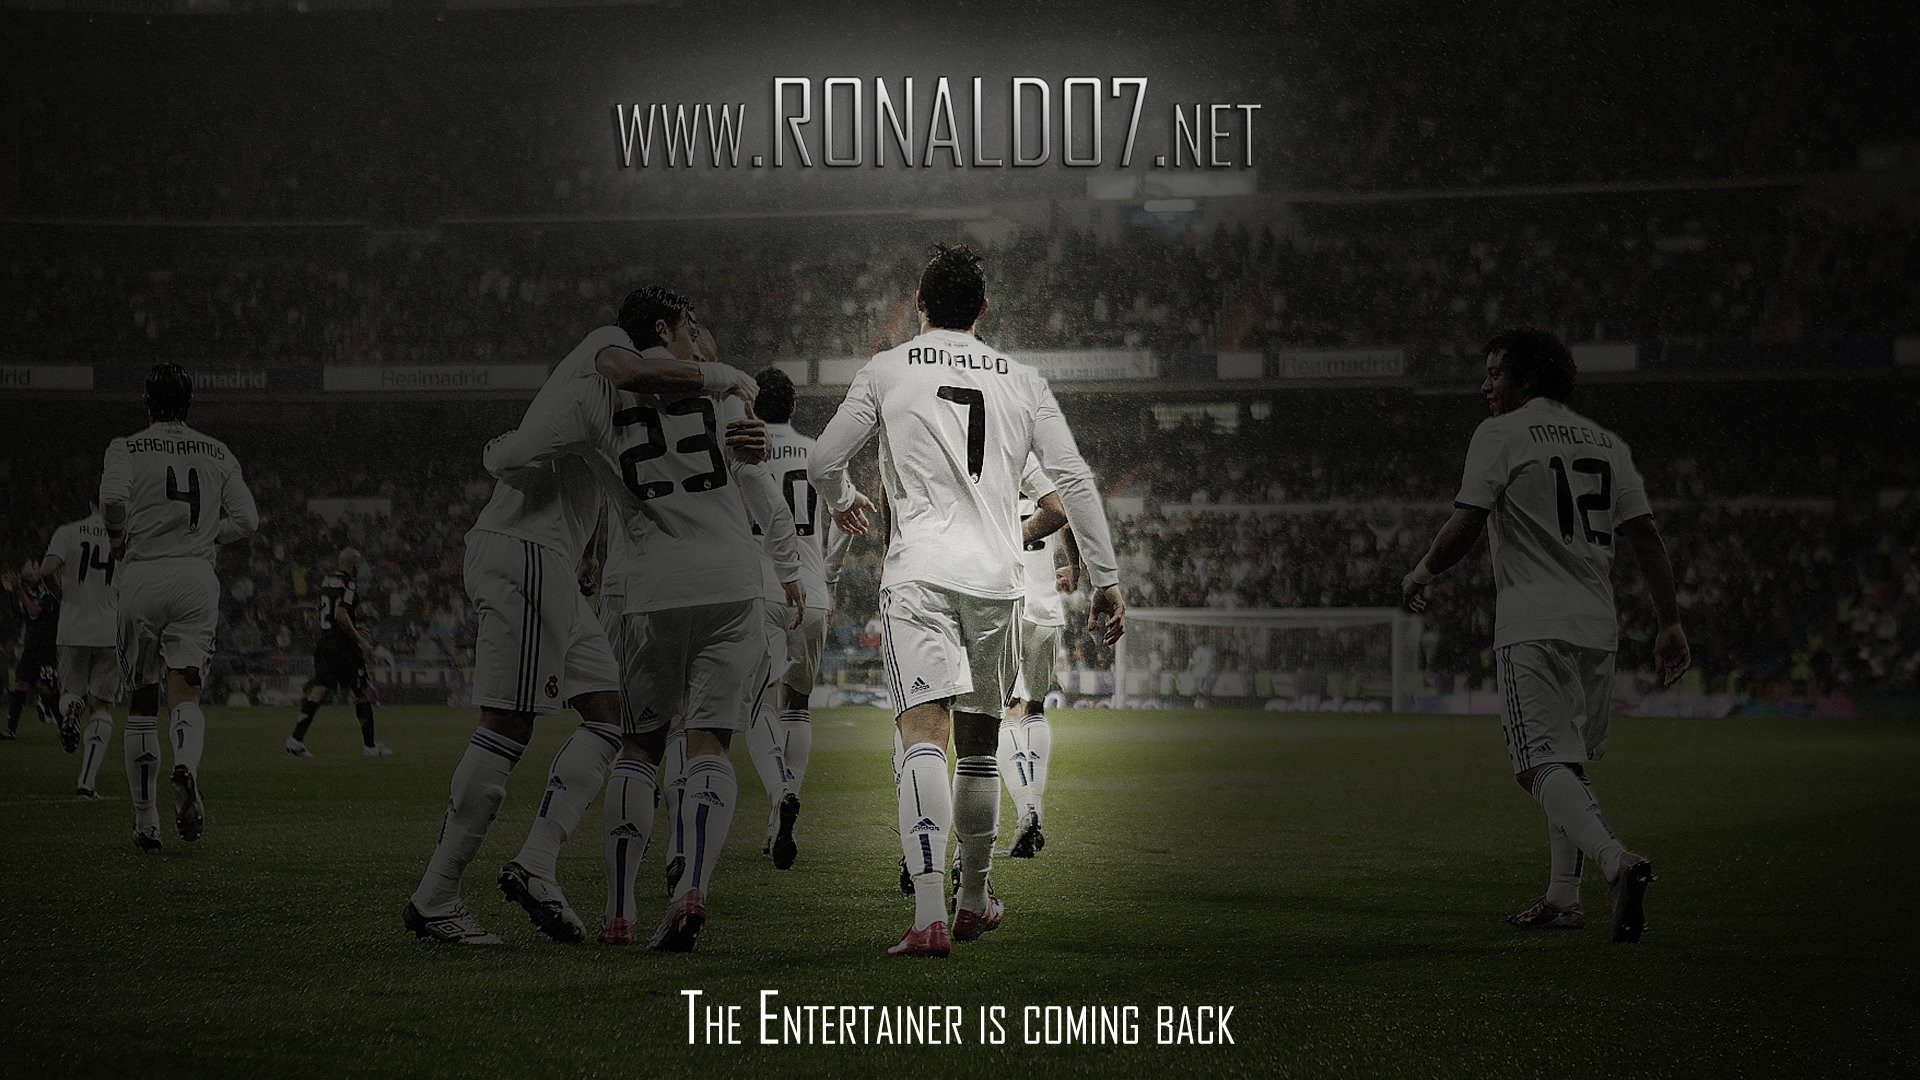 1920x1080 Cristiano Ronaldo wallpaper in Full HD (): The entertainer is  coming back